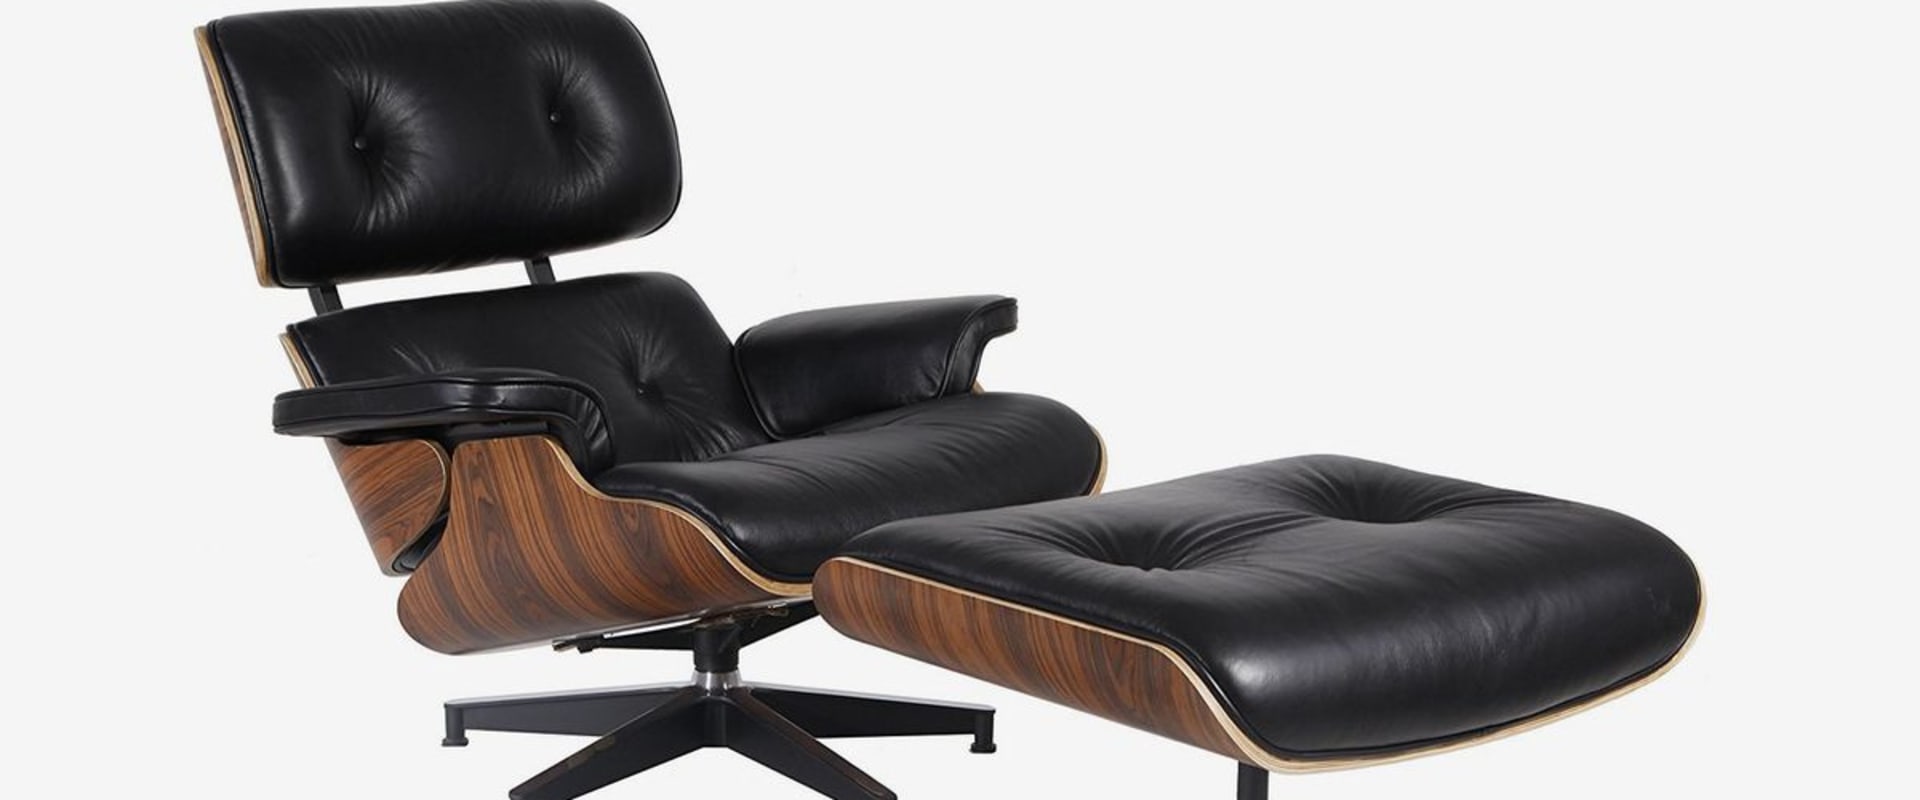 What Types of Chairs are Best for Lounging?